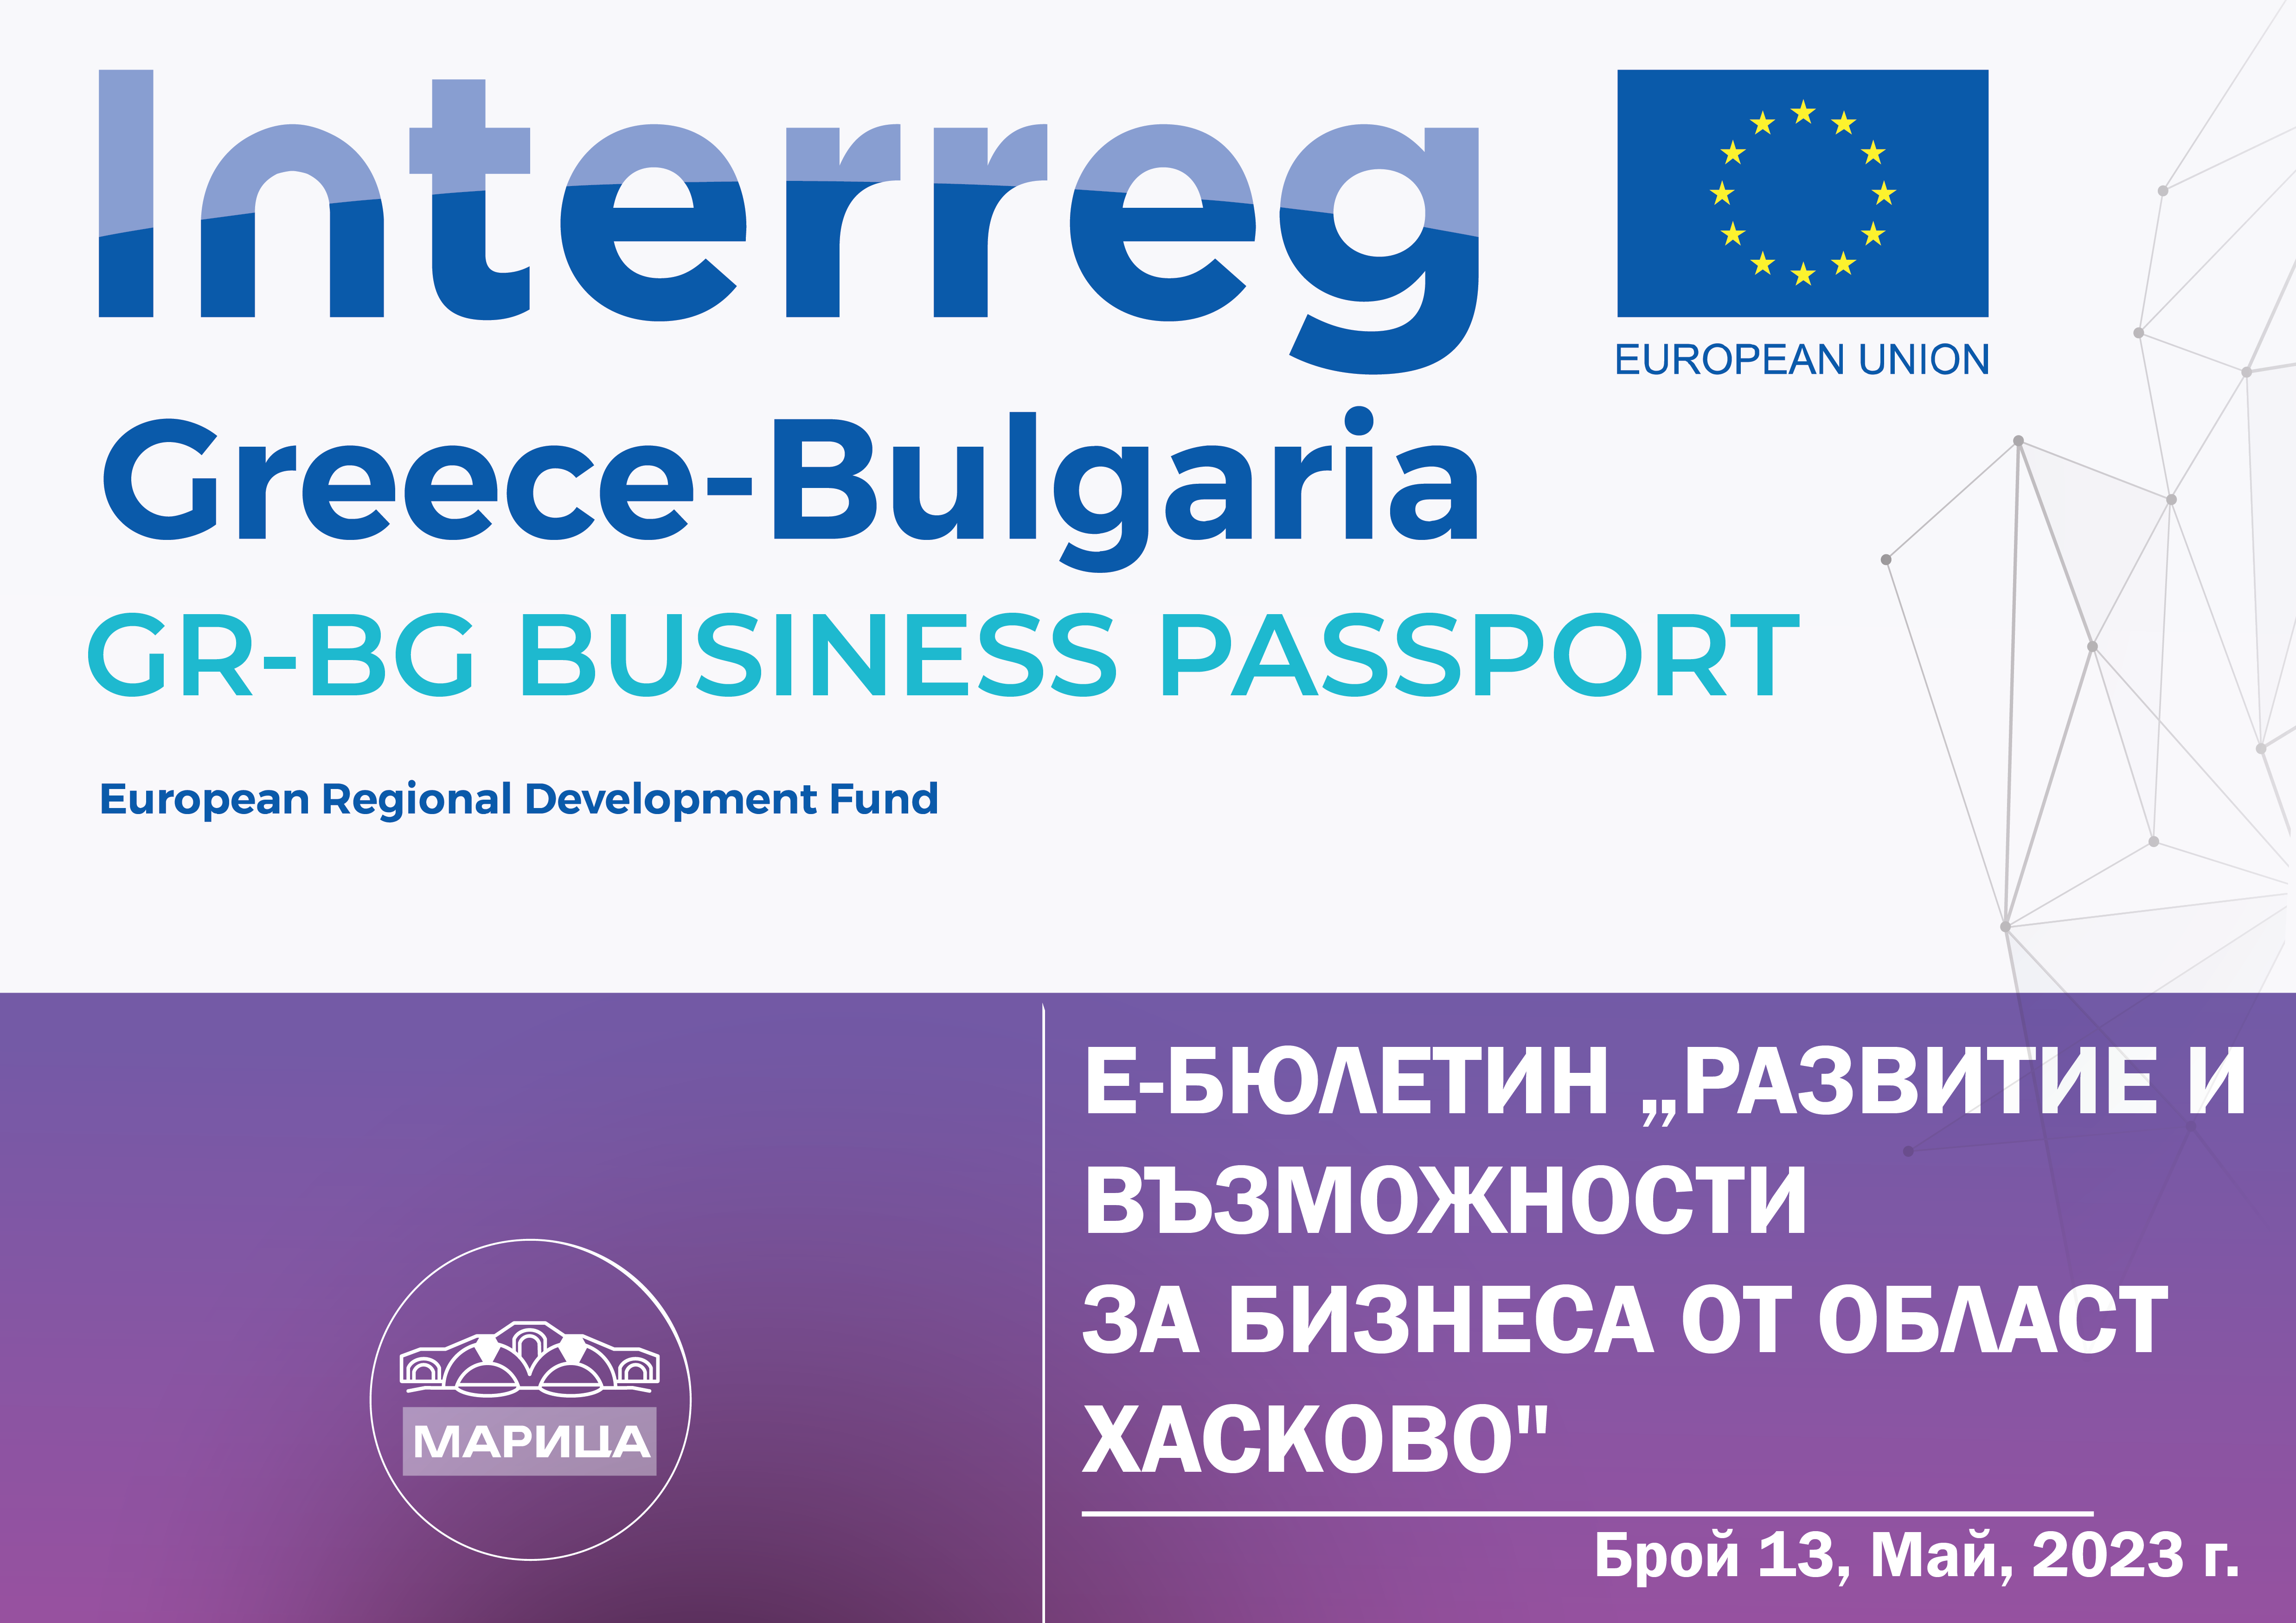 e-newsletter “Development and opportunities for business in the Haskovo region” under a project with the acronym “GR-BG BUSINESS PASSPORT, 13th edition